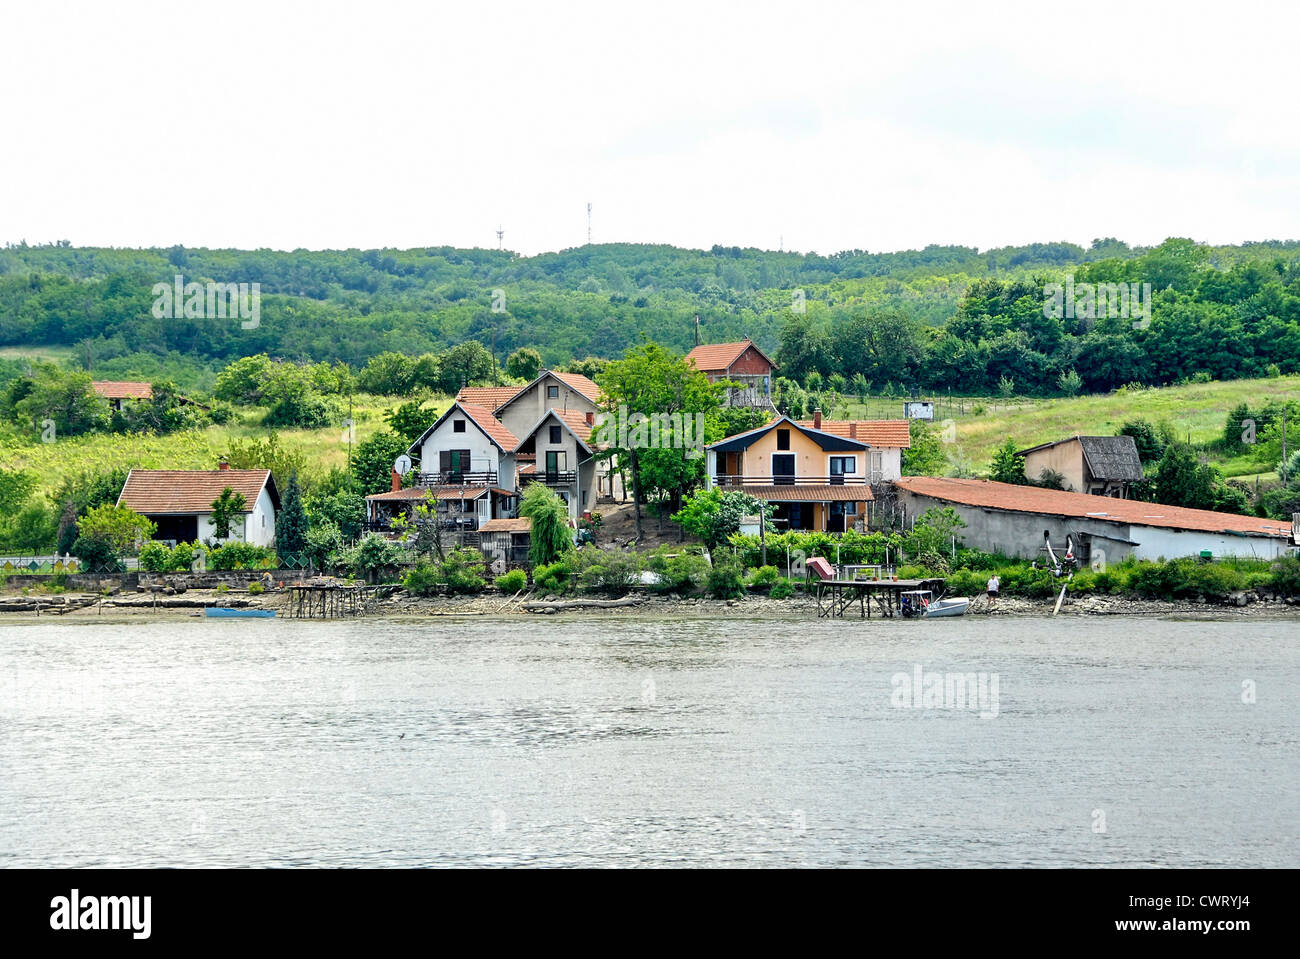 Village in the Iron Gates gorge on the Danube River between Romania and Serbia Stock Photo